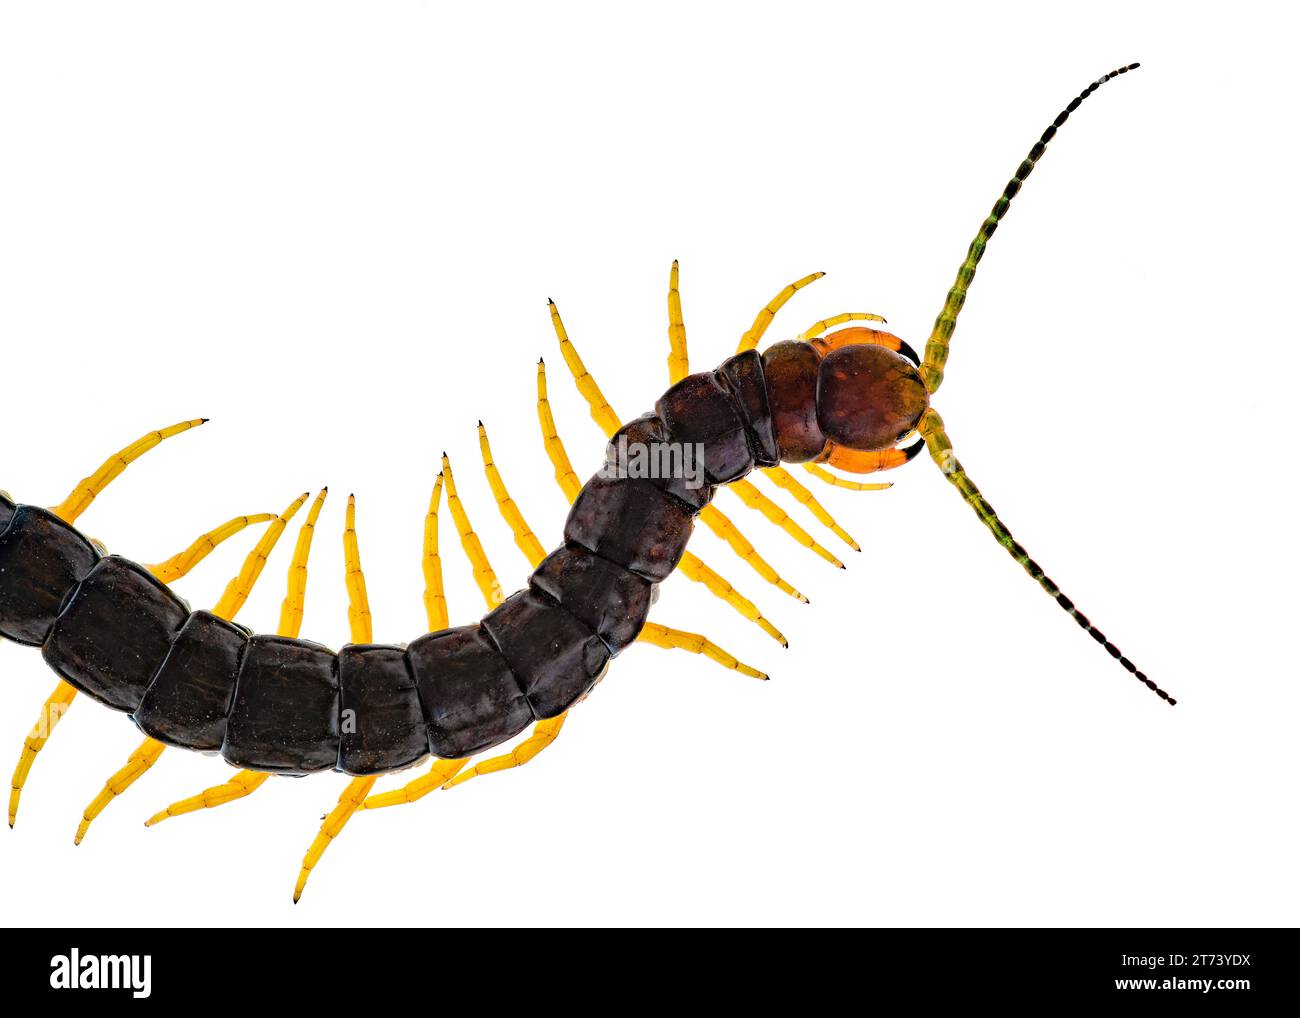 Scolopendra cingulata, also known as Megarian banded centipede, and the Mediterranean banded centipede. Isolated on white Stock Photo